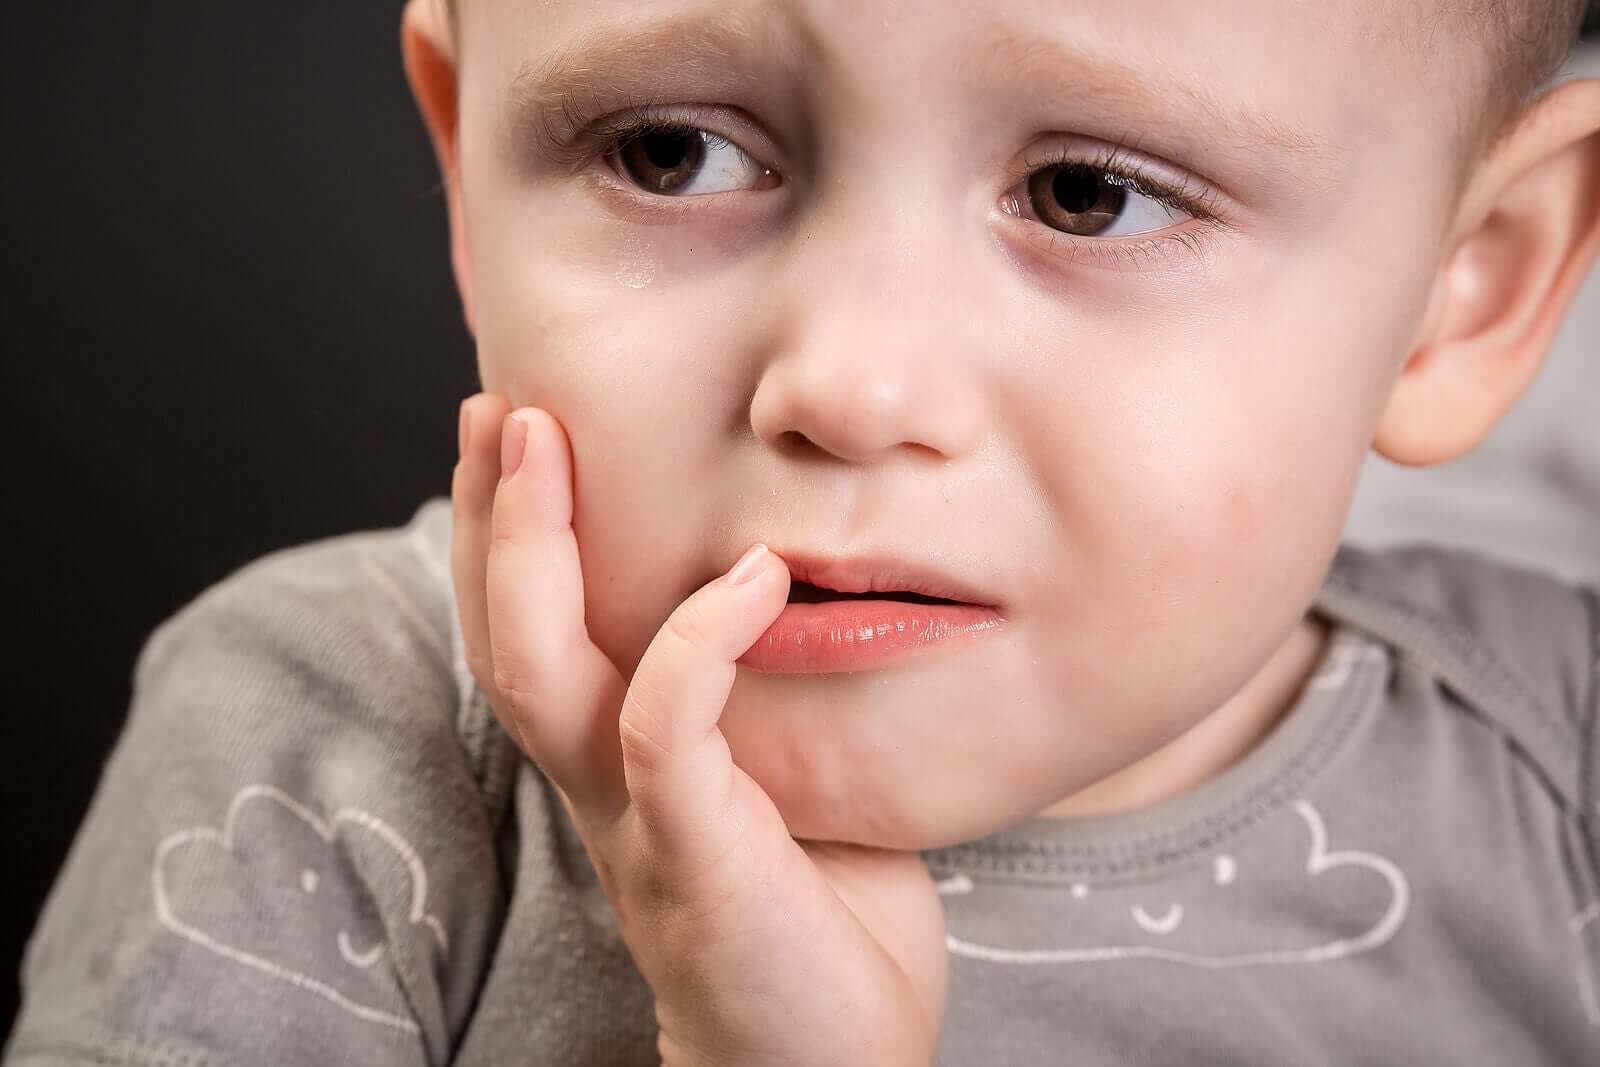 Dental Avulsion in Children: What It Is and How to Act